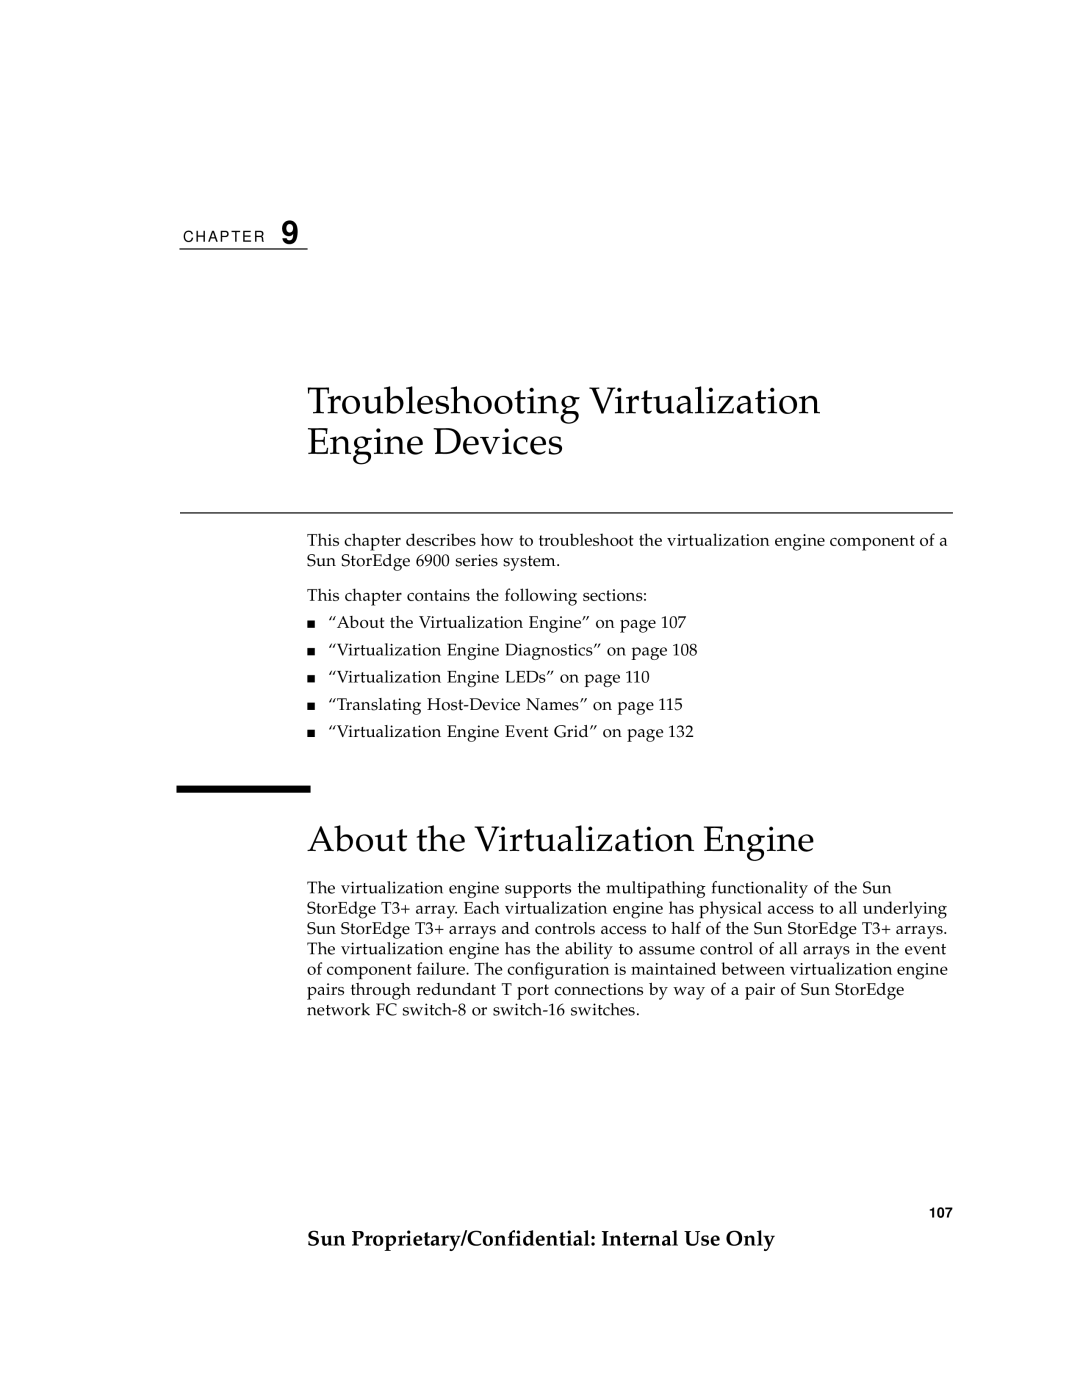 Sun Microsystems 6900, 3900 manual Troubleshooting Virtualization Engine Devices, About the Virtualization Engine 